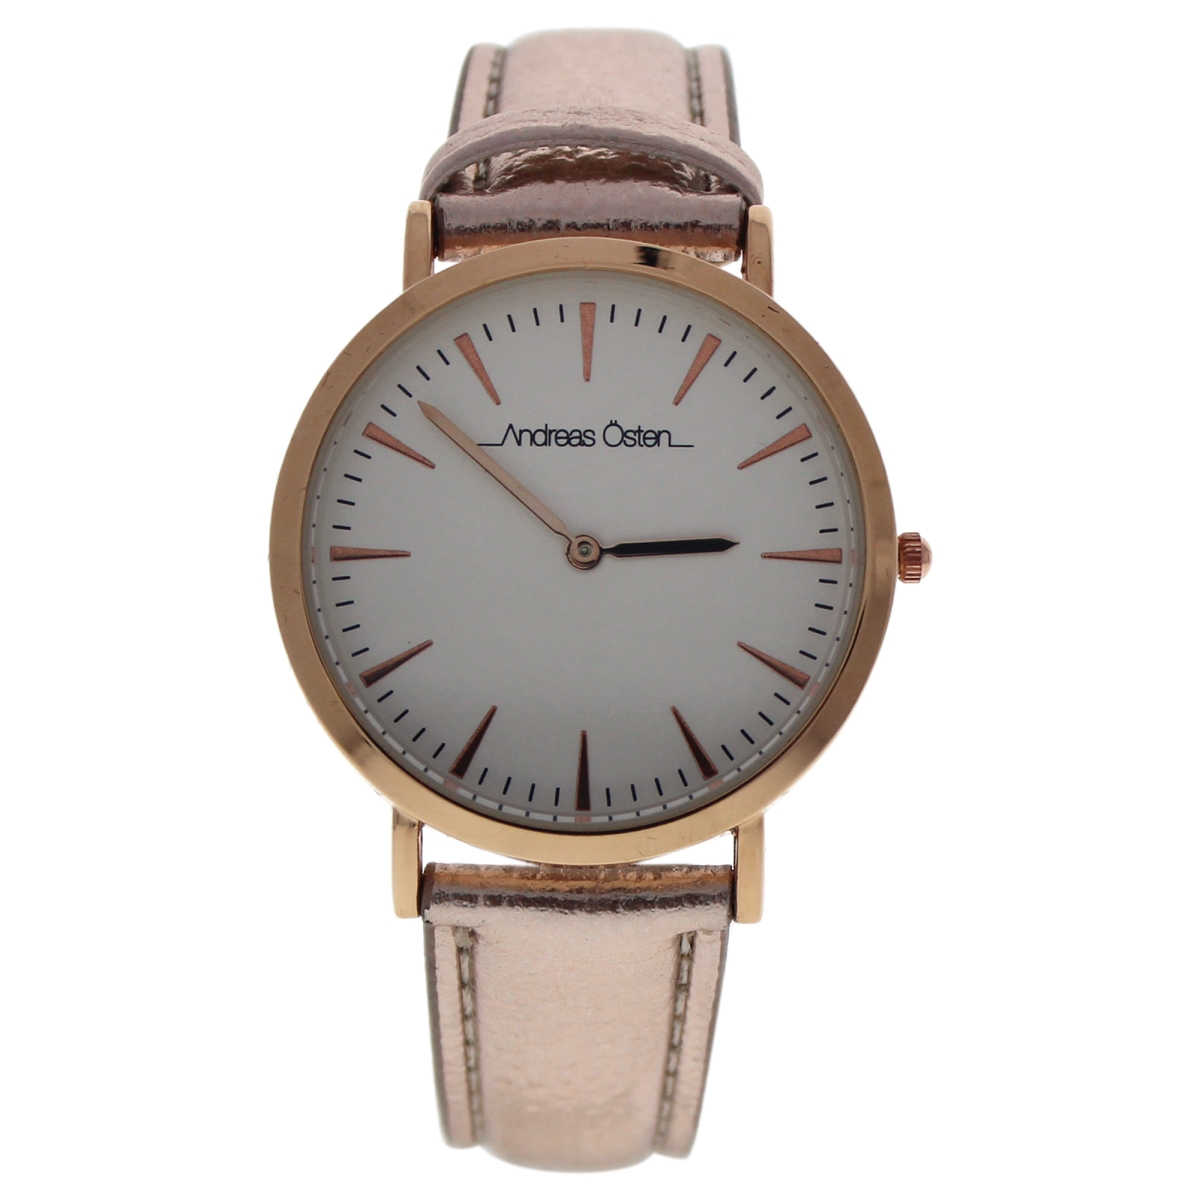 Picture of Andreas Osten W-WAT-1452 Hygge - Rose Leather Strap Watch by Andreas Osten for Women Watch, Gold & White